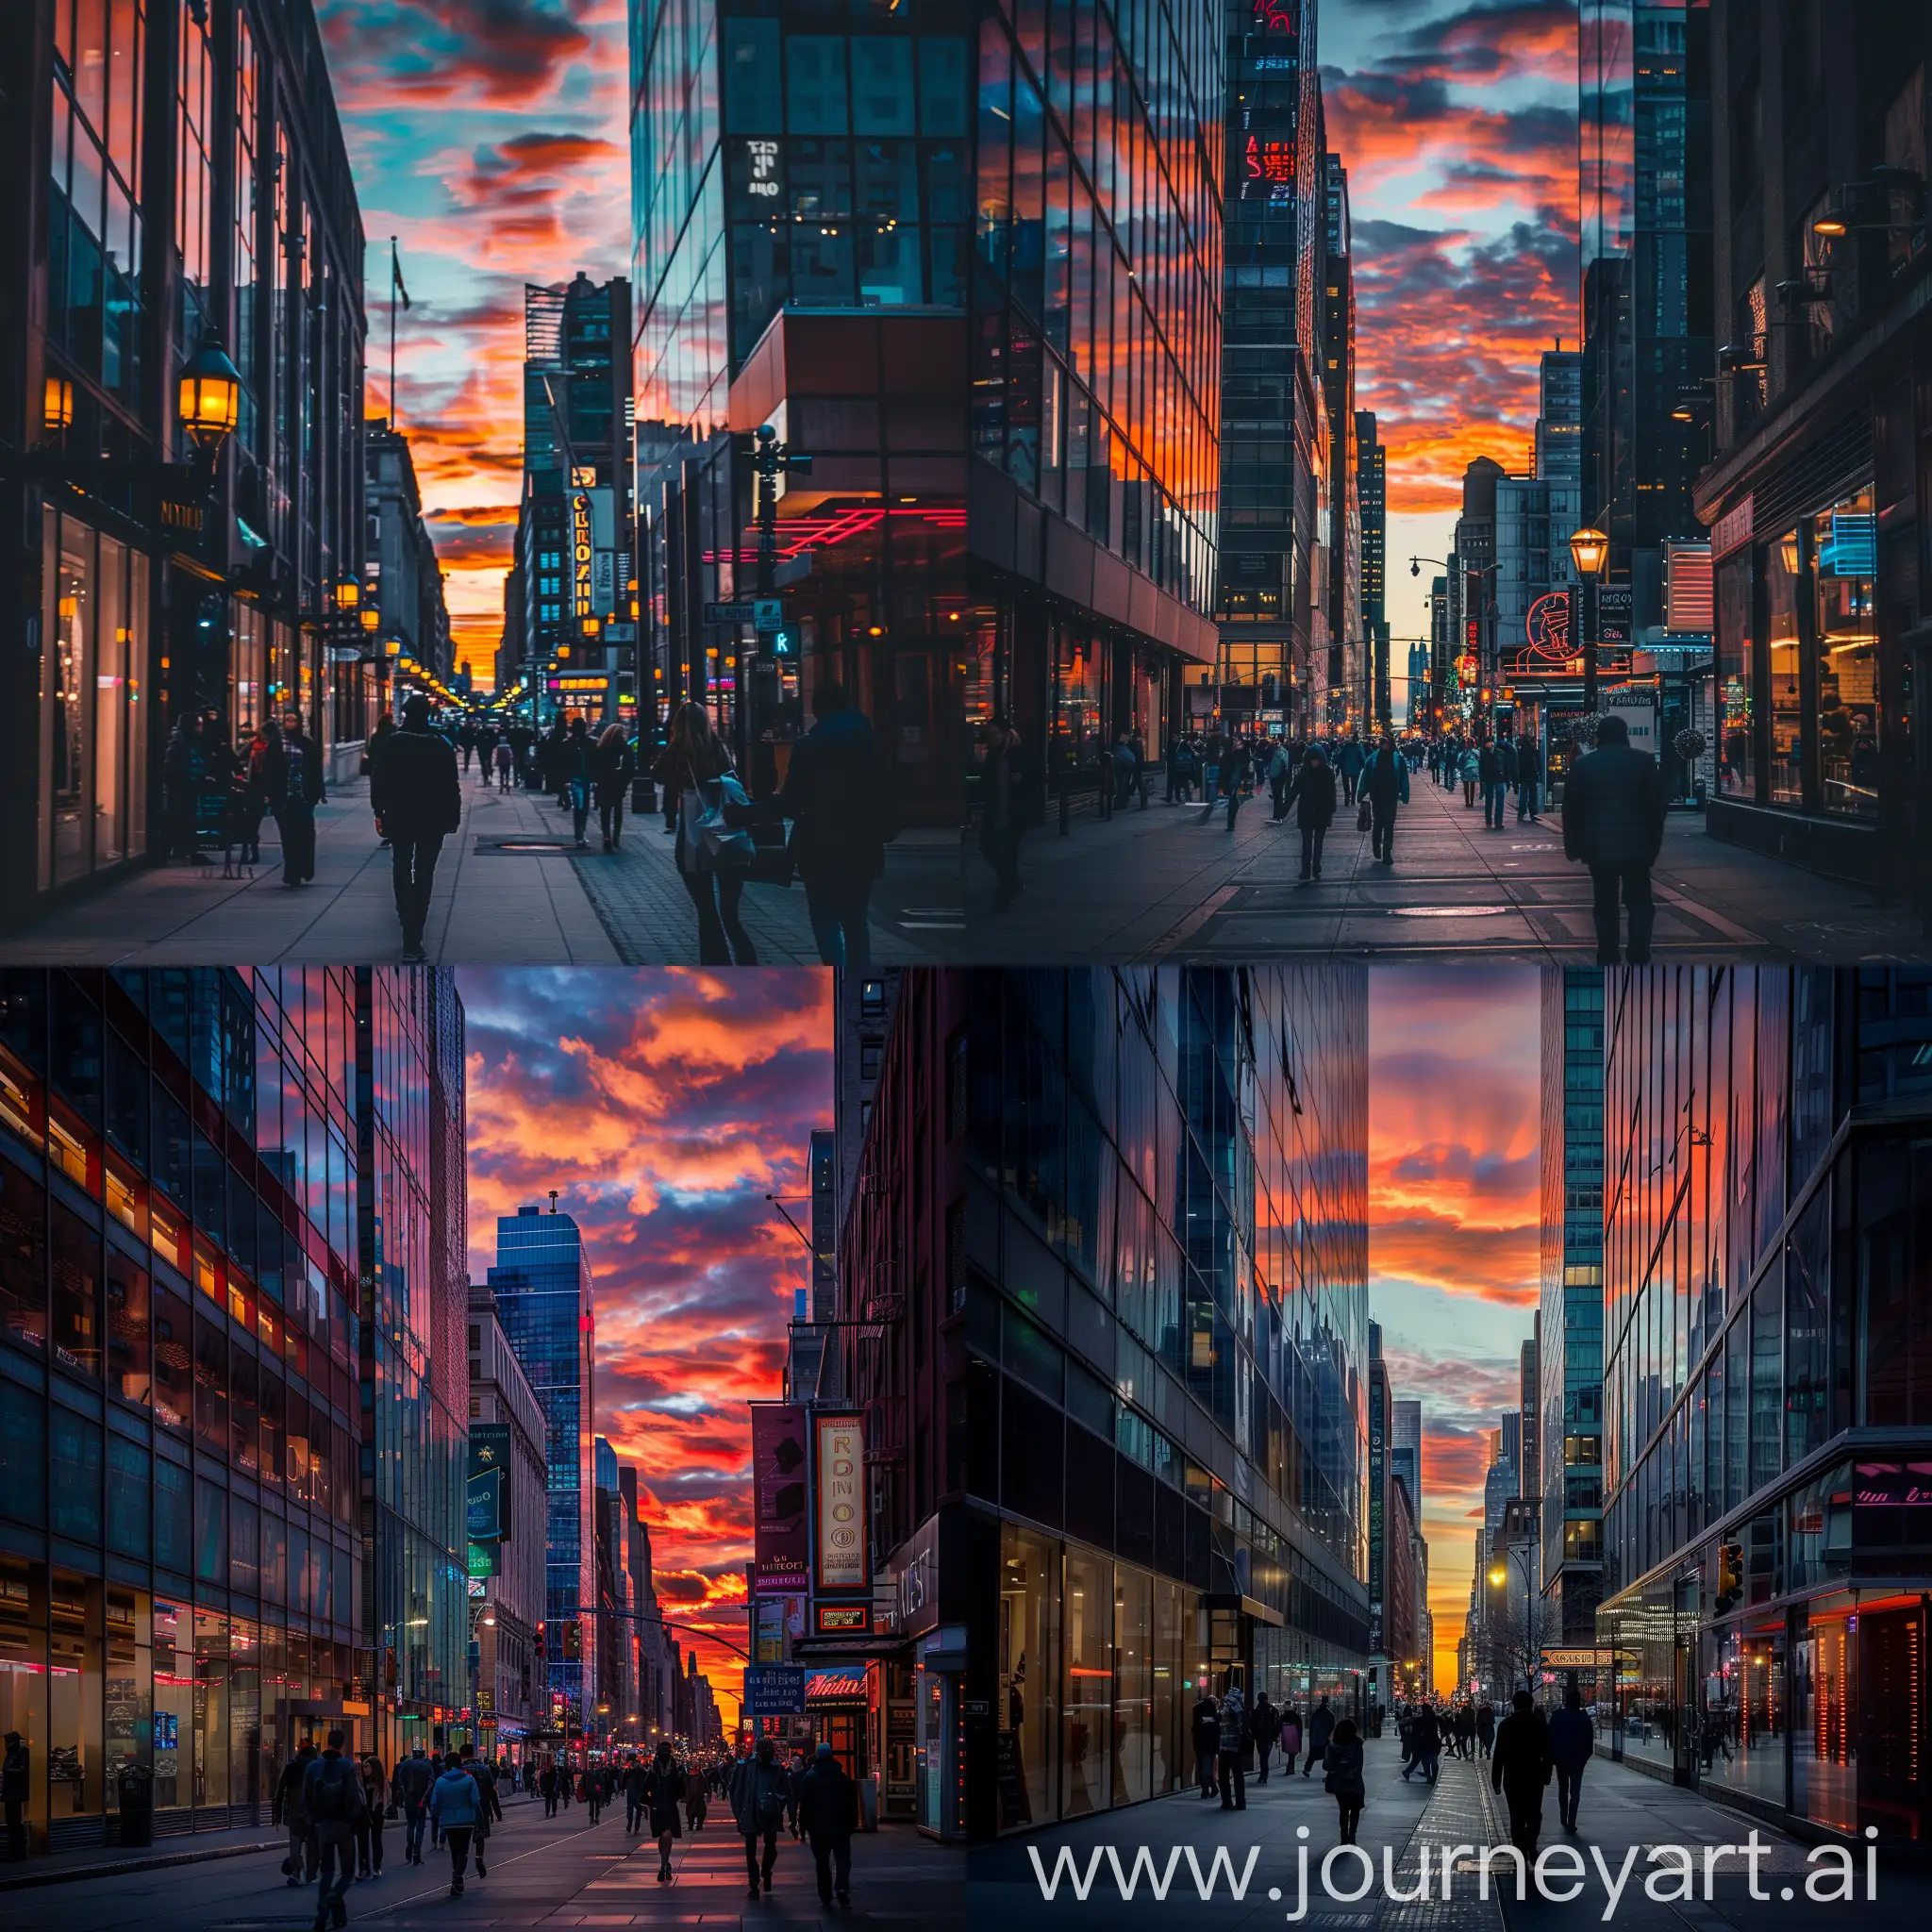 A captivating street photograph capturing a bustling city street at sunset. The sky is ablaze with hues of orange and pink, reflecting off the windows of tall buildings. People walk along the sidewalks, creating a sense of movement and life. Streetlights and neon signs start to glow, adding a warm ambiance to the scene. The composition highlights the energy and vibrancy of urban life. --ar 16:9 --v 5 --q 2 --style 4b